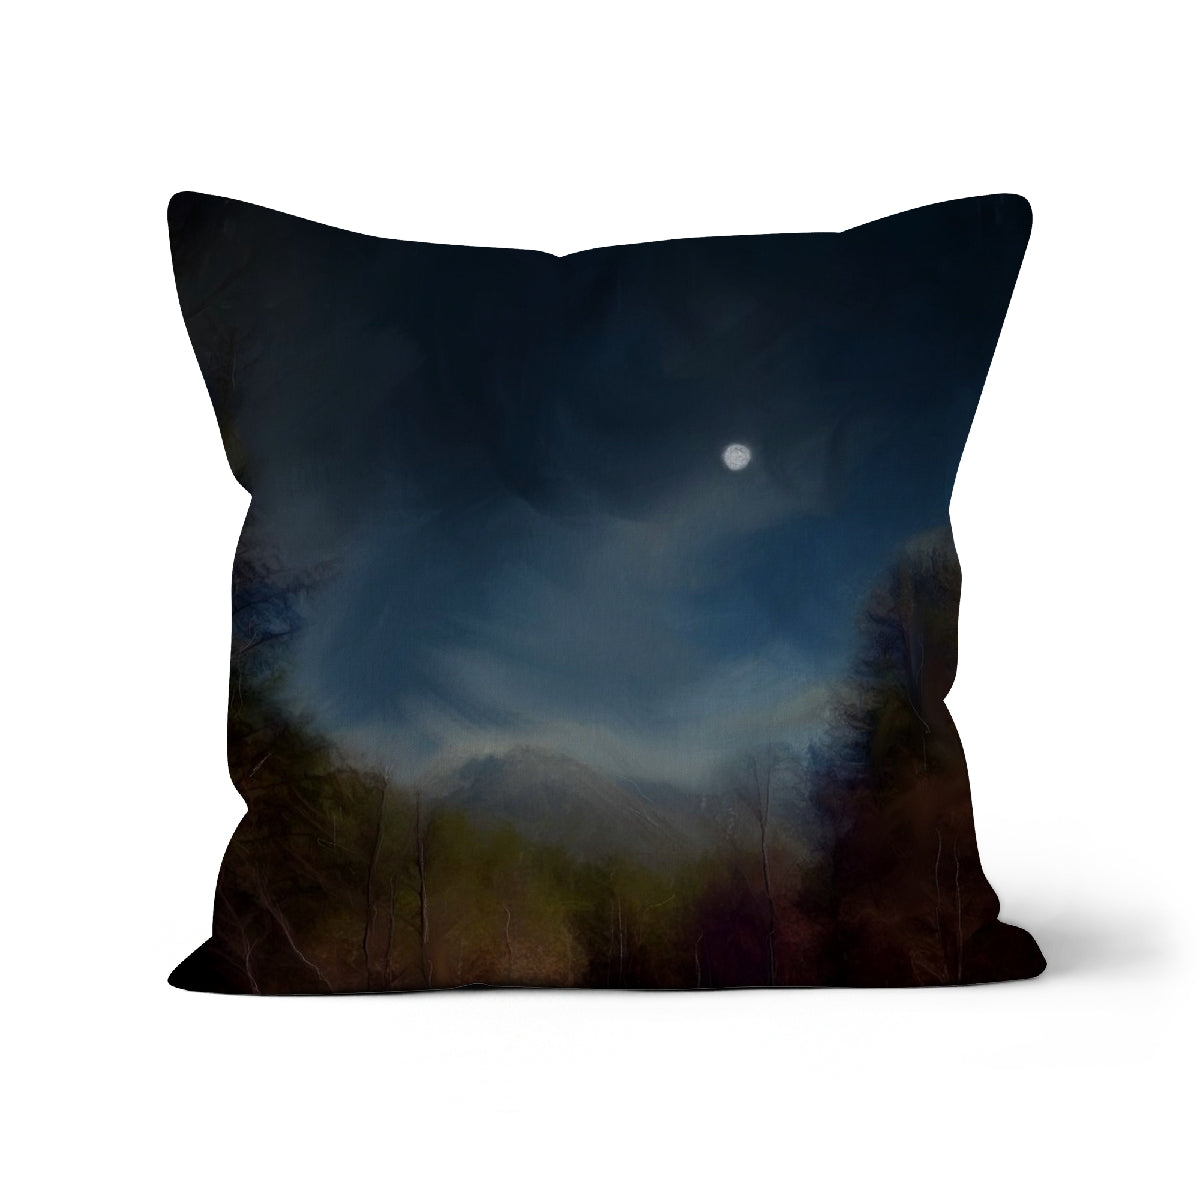 Glencoe Lochan Moonlight Art Gifts Cushion-Cushions-Scottish Lochs & Mountains Art Gallery-Faux Suede-16"x16"-Paintings, Prints, Homeware, Art Gifts From Scotland By Scottish Artist Kevin Hunter